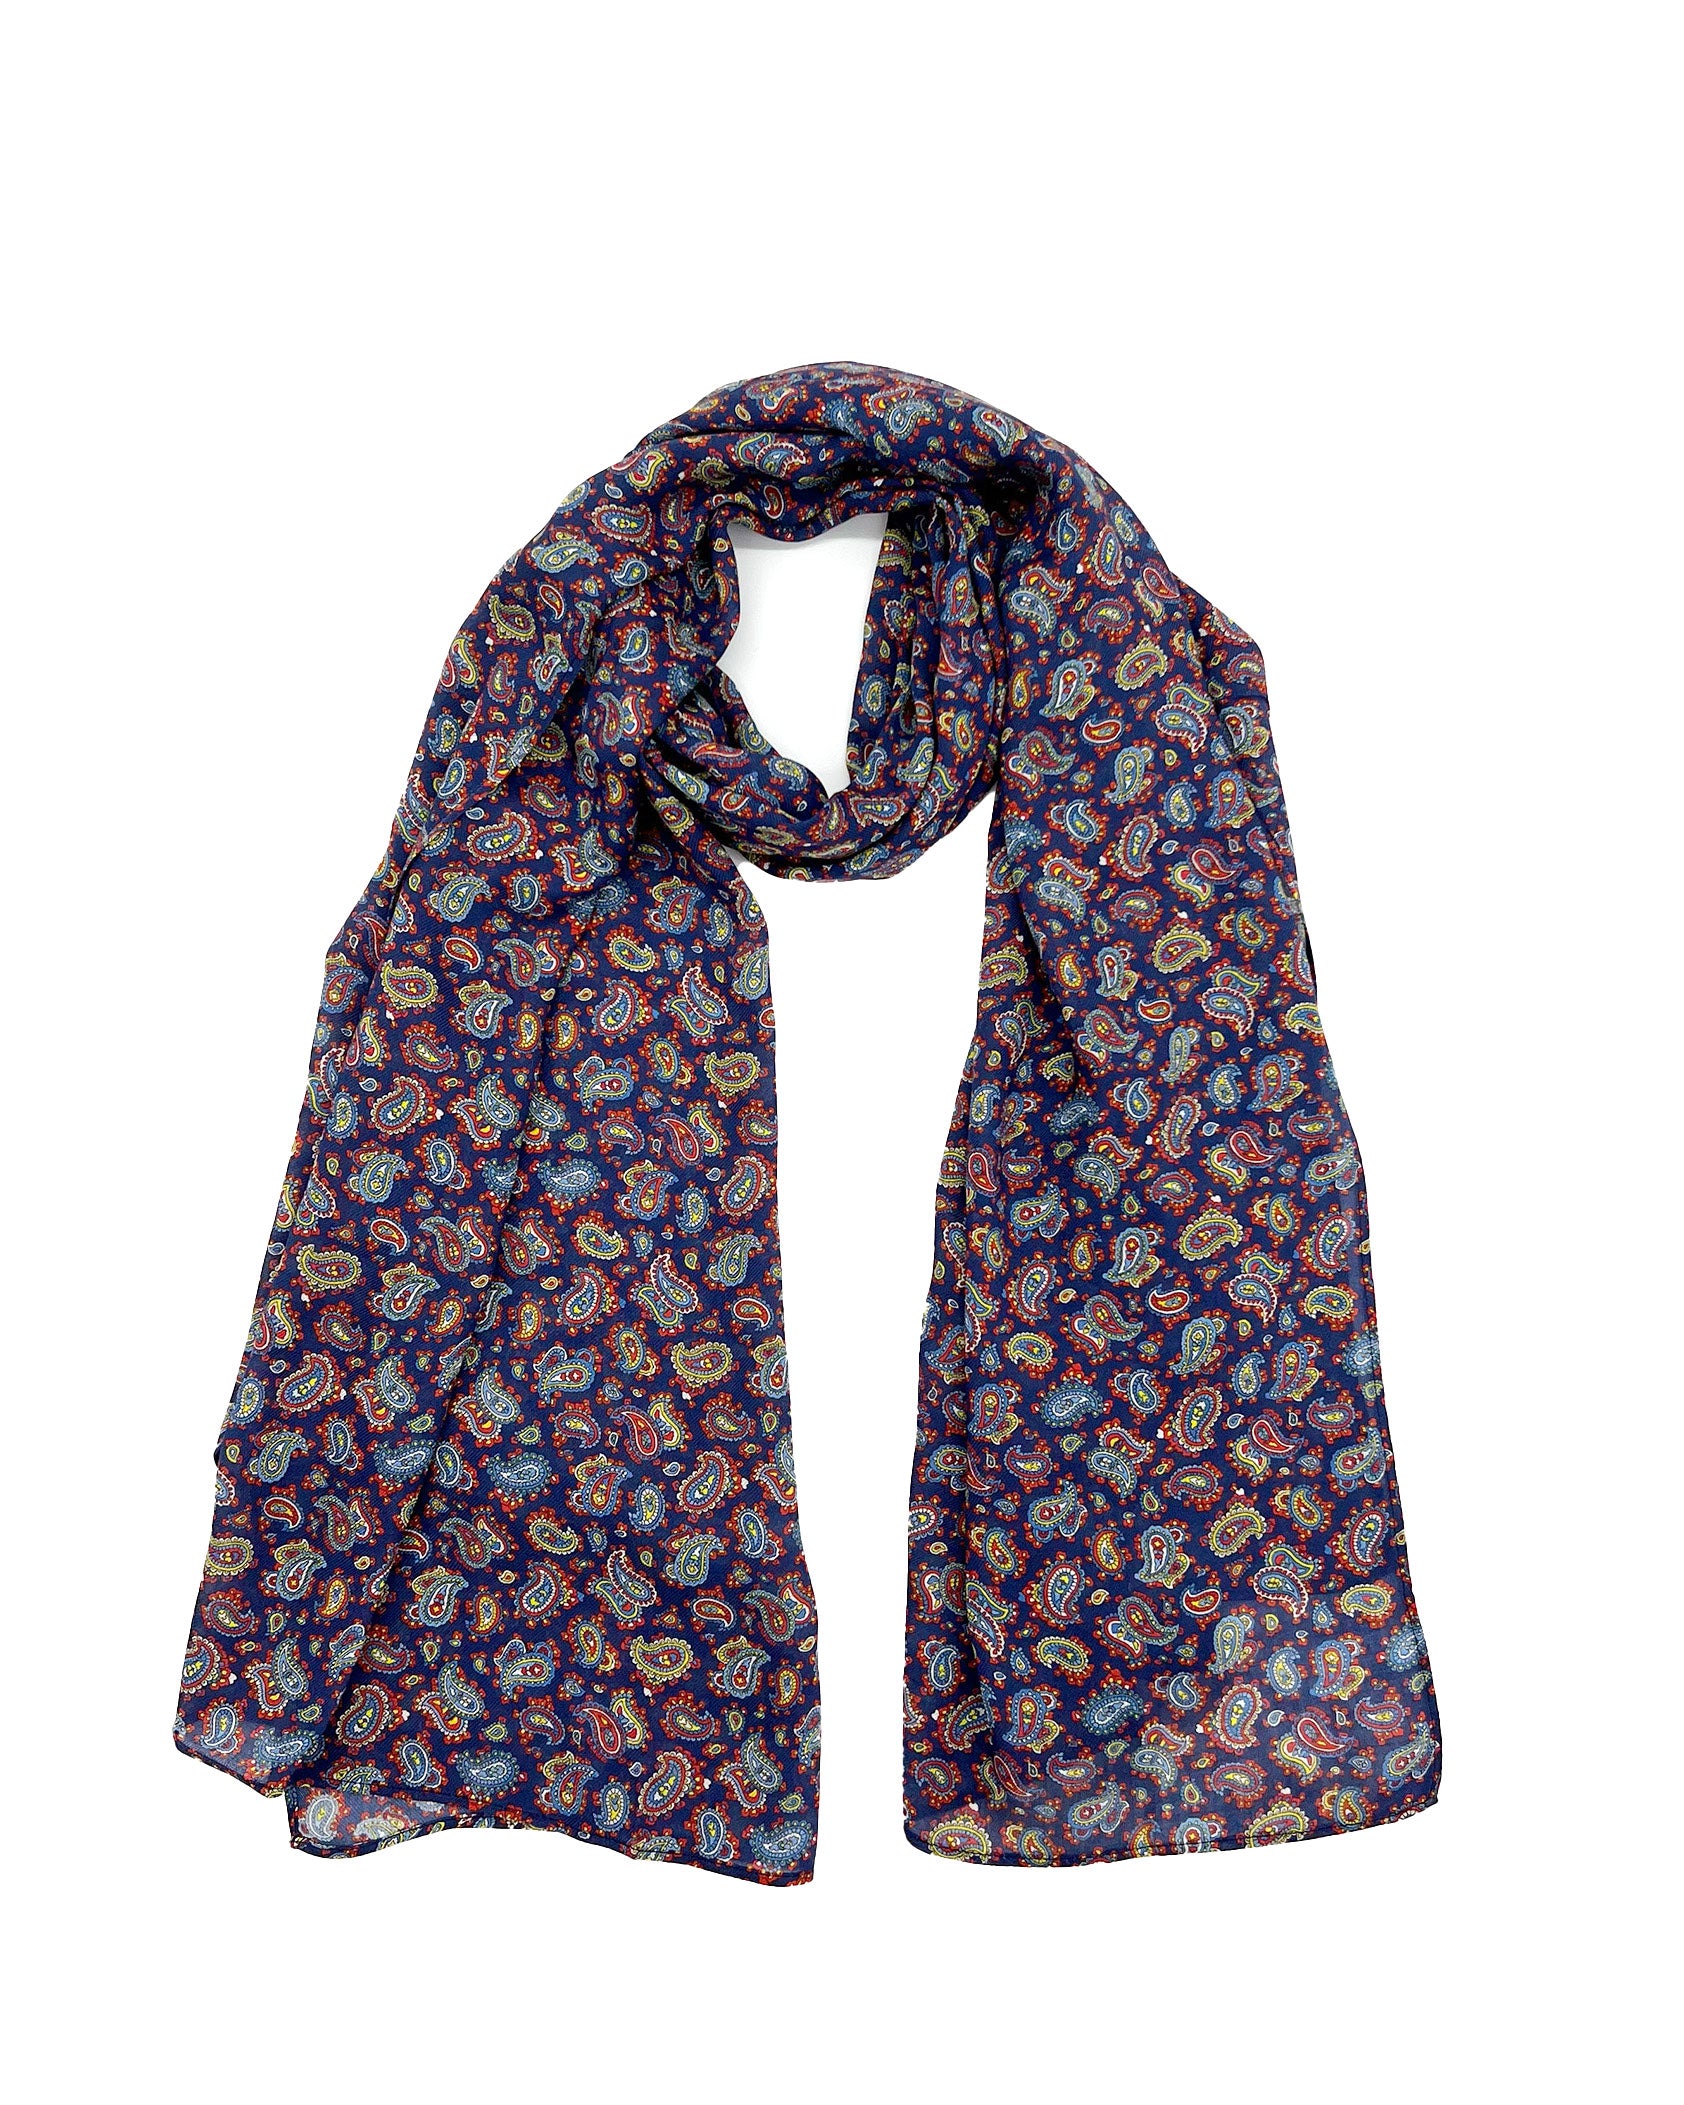 The Lexington wide scarf unravelled and looped in the middle, demonstrating the considerable length and showing the multicoloured paisley patterns against a blue ground.